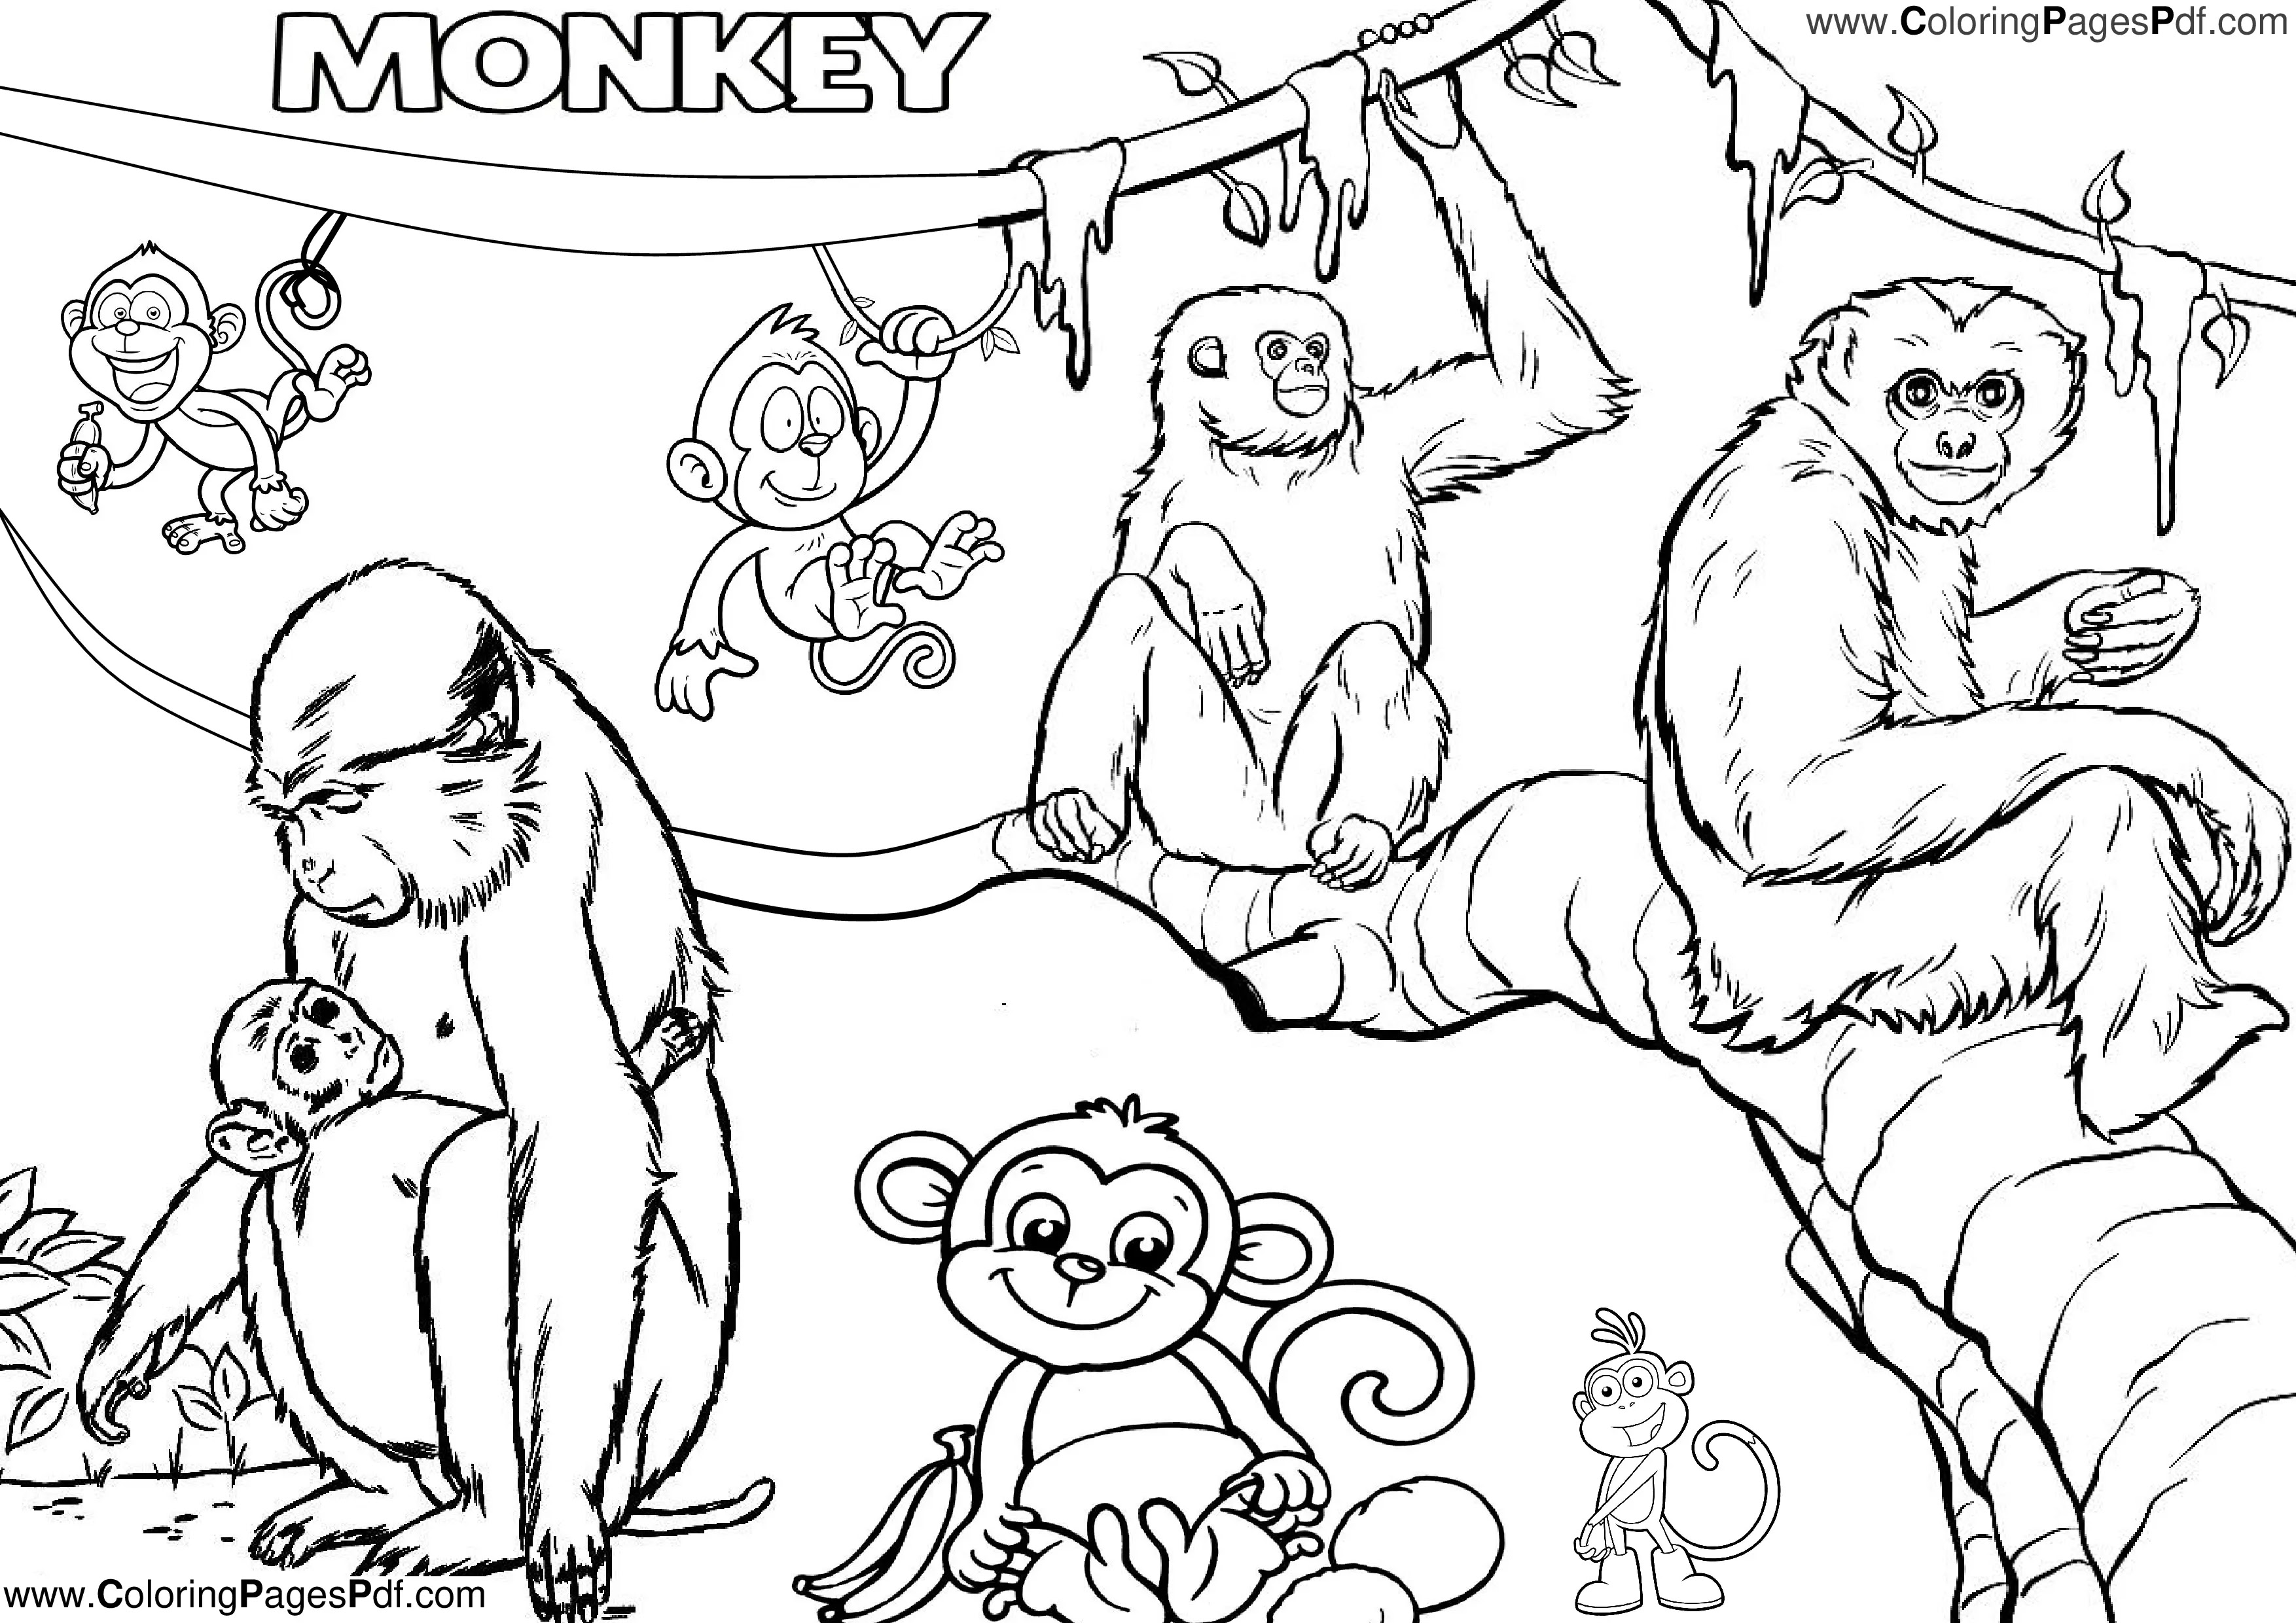 Free printable monkey coloring pages